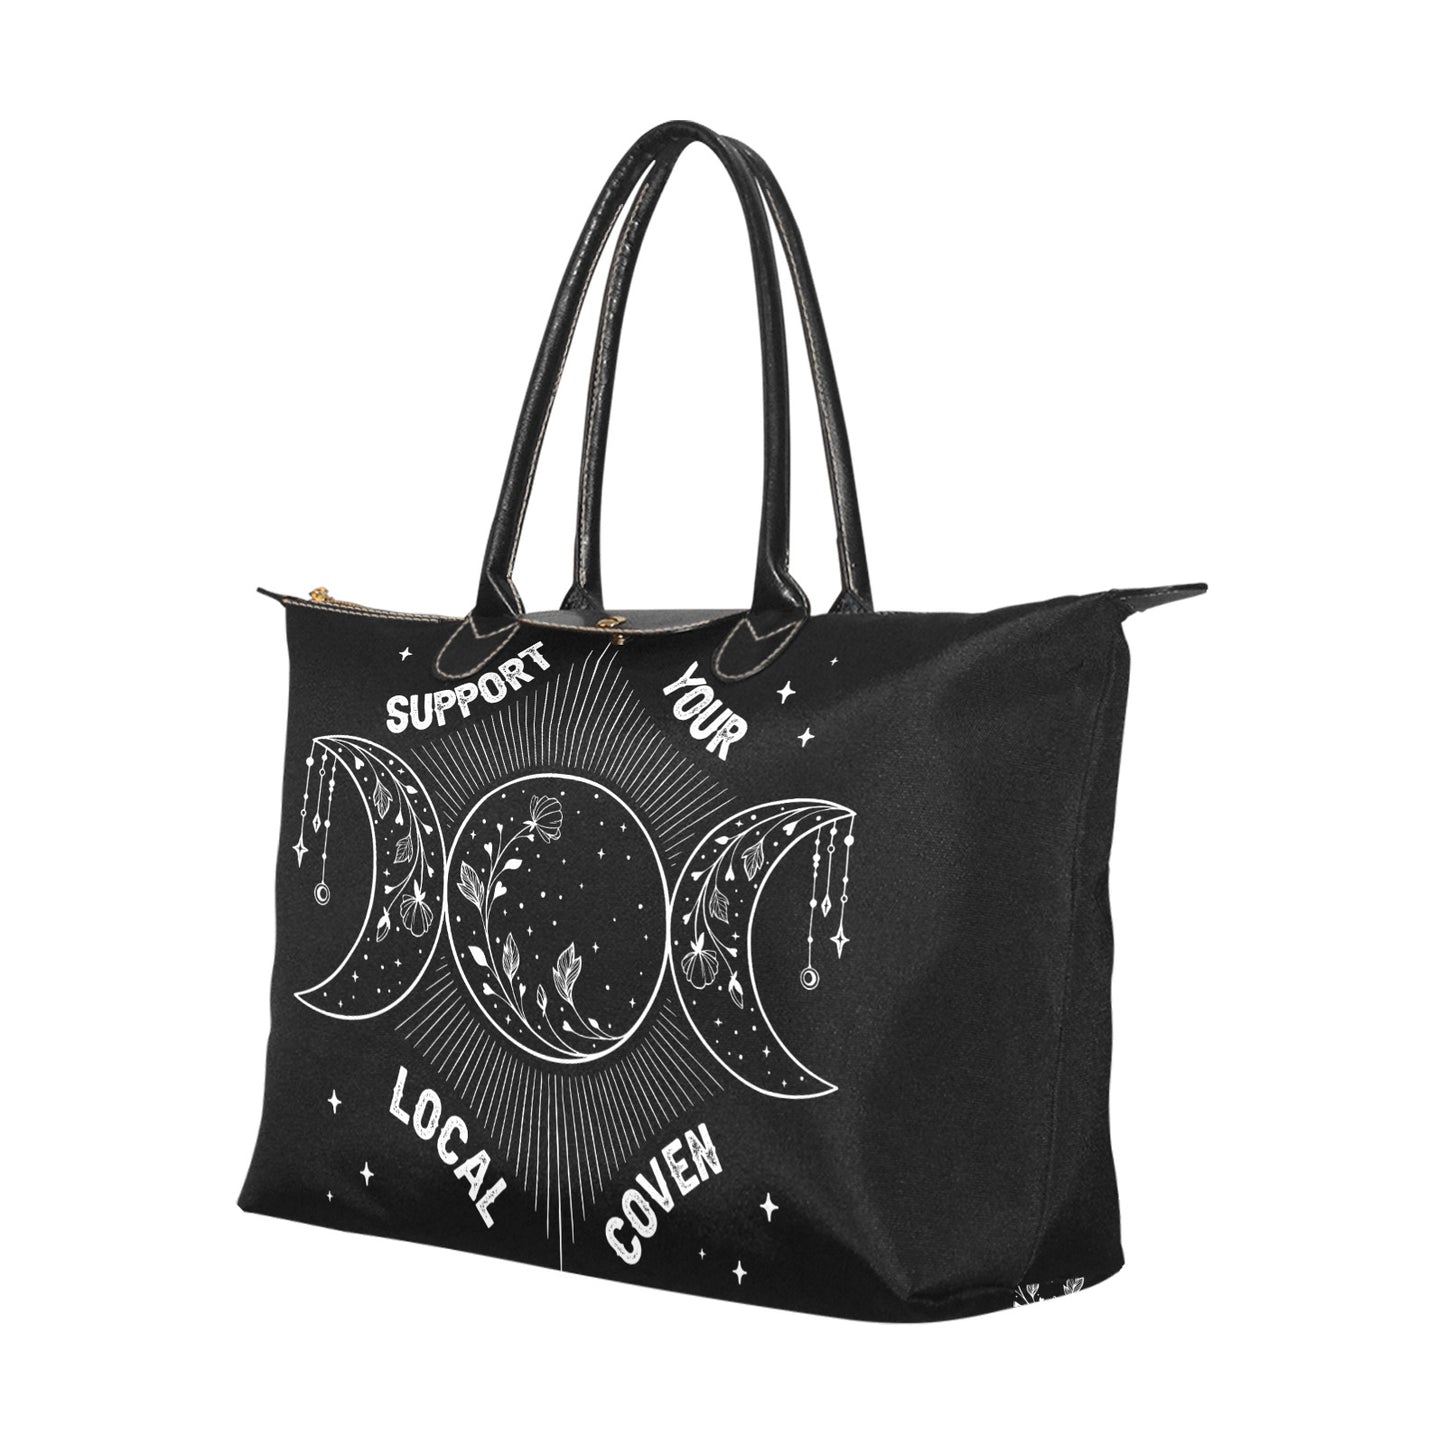 Support your local coven Triple moon women fabric zip tote